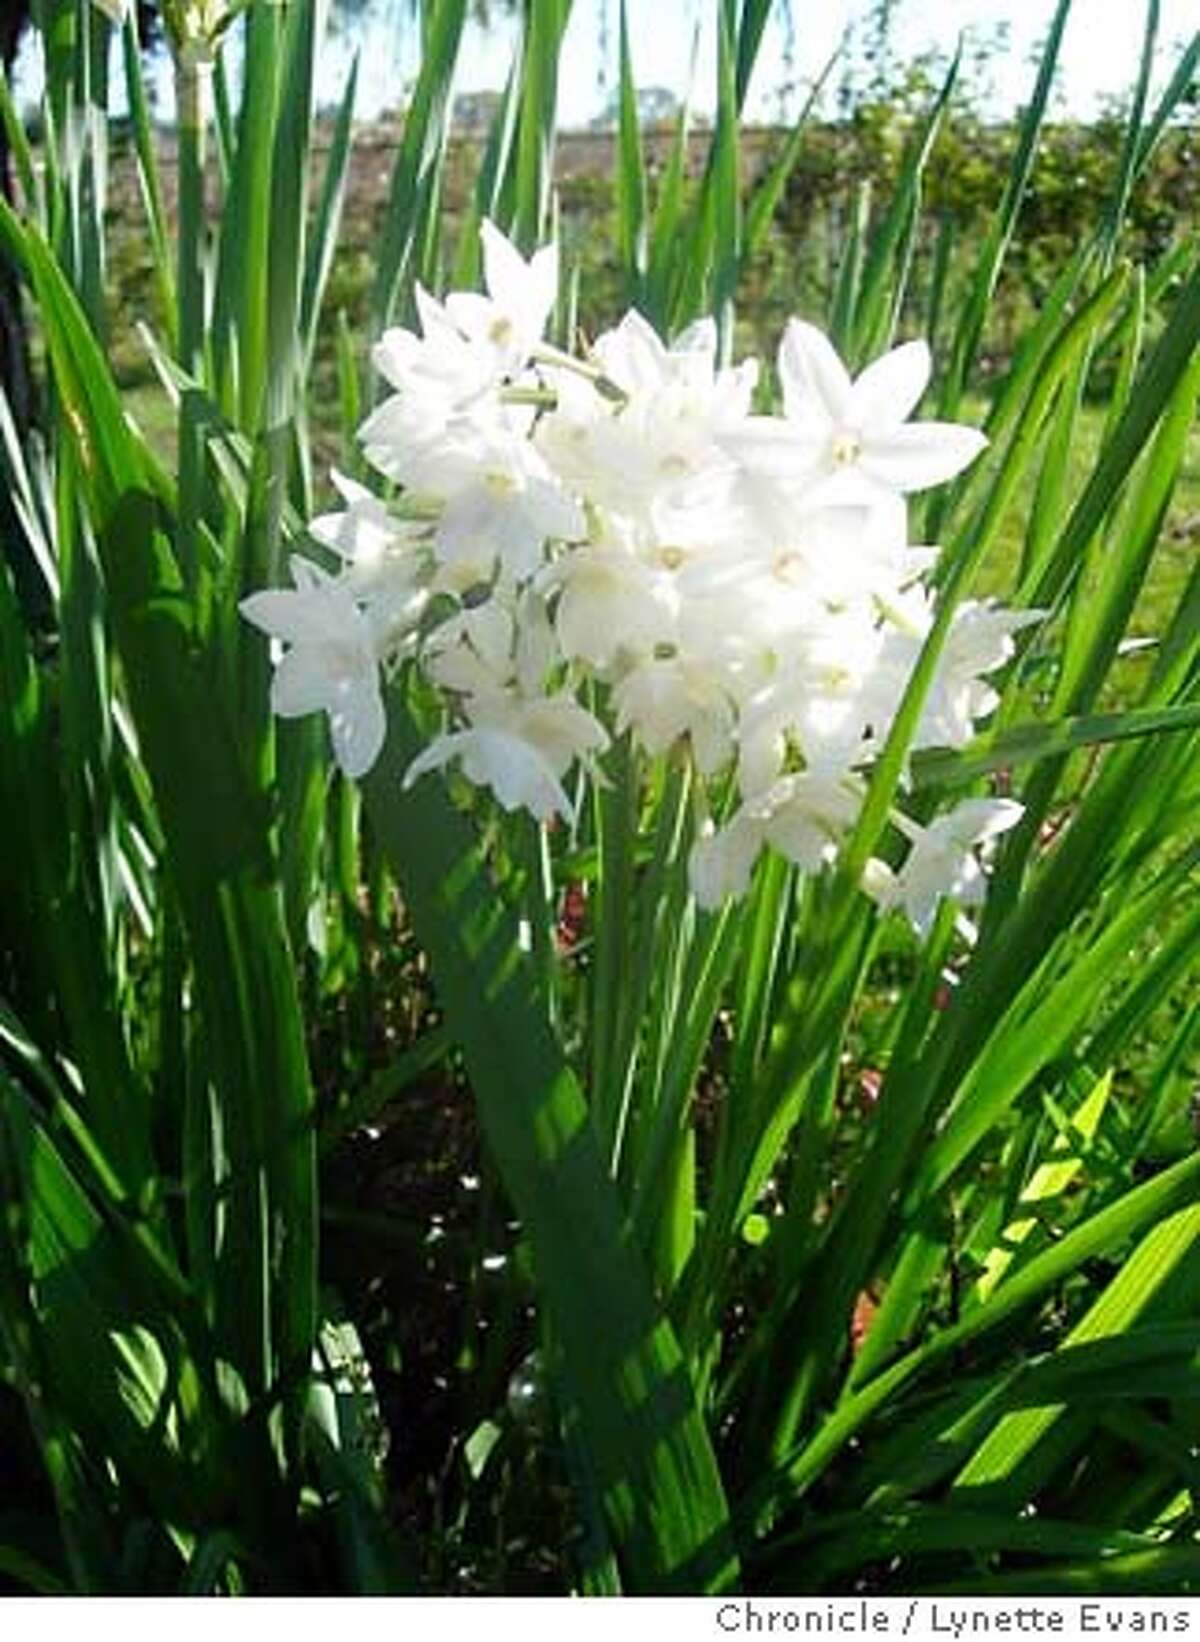 Spectacular outdoors, paperwhites can be forced to bloom early indoors. Their fragrant blooms are a winter tradition for many. Chronicle photo by Lynette Evans